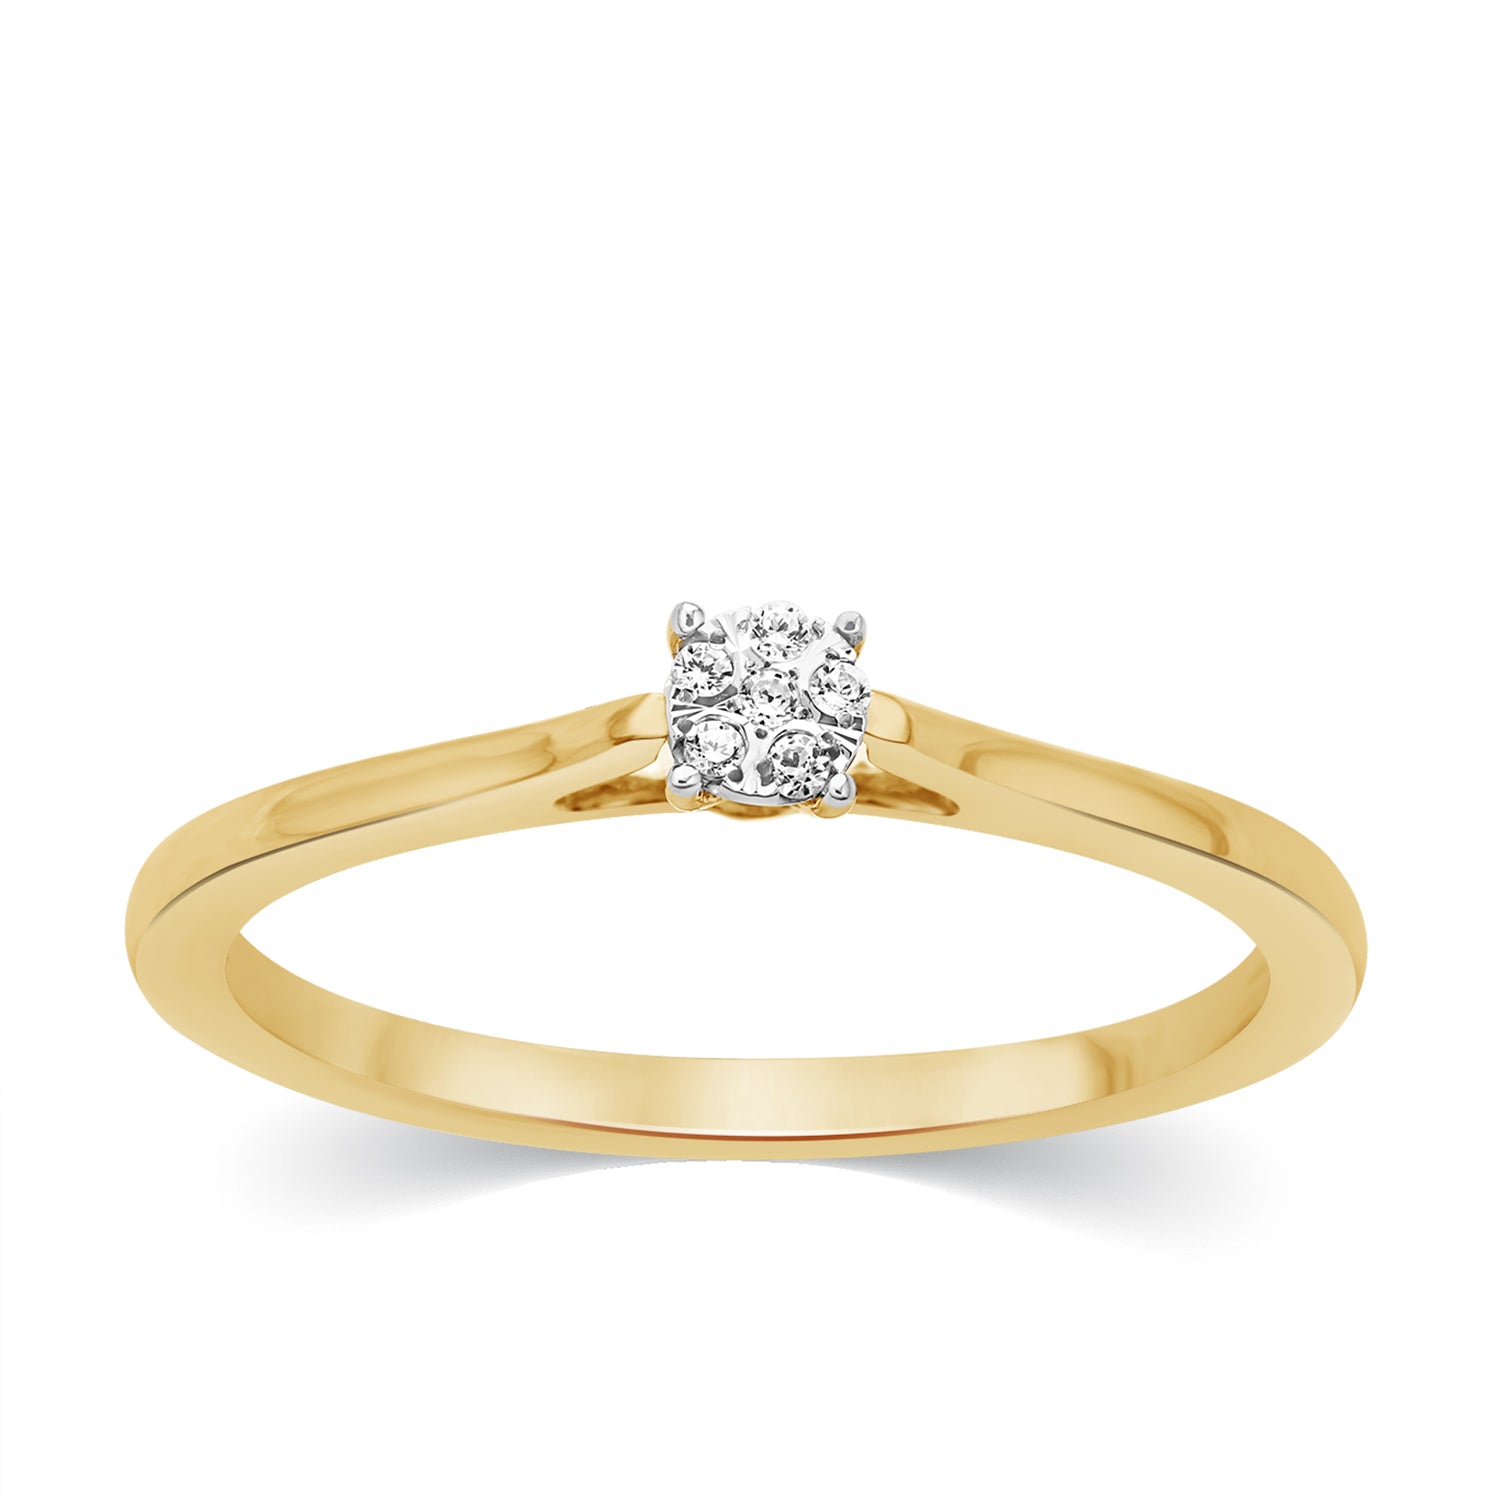 Solitaire Wedding Band Ring With 0.03 Carat TW Of Diamonds In 10K Yellow Gold